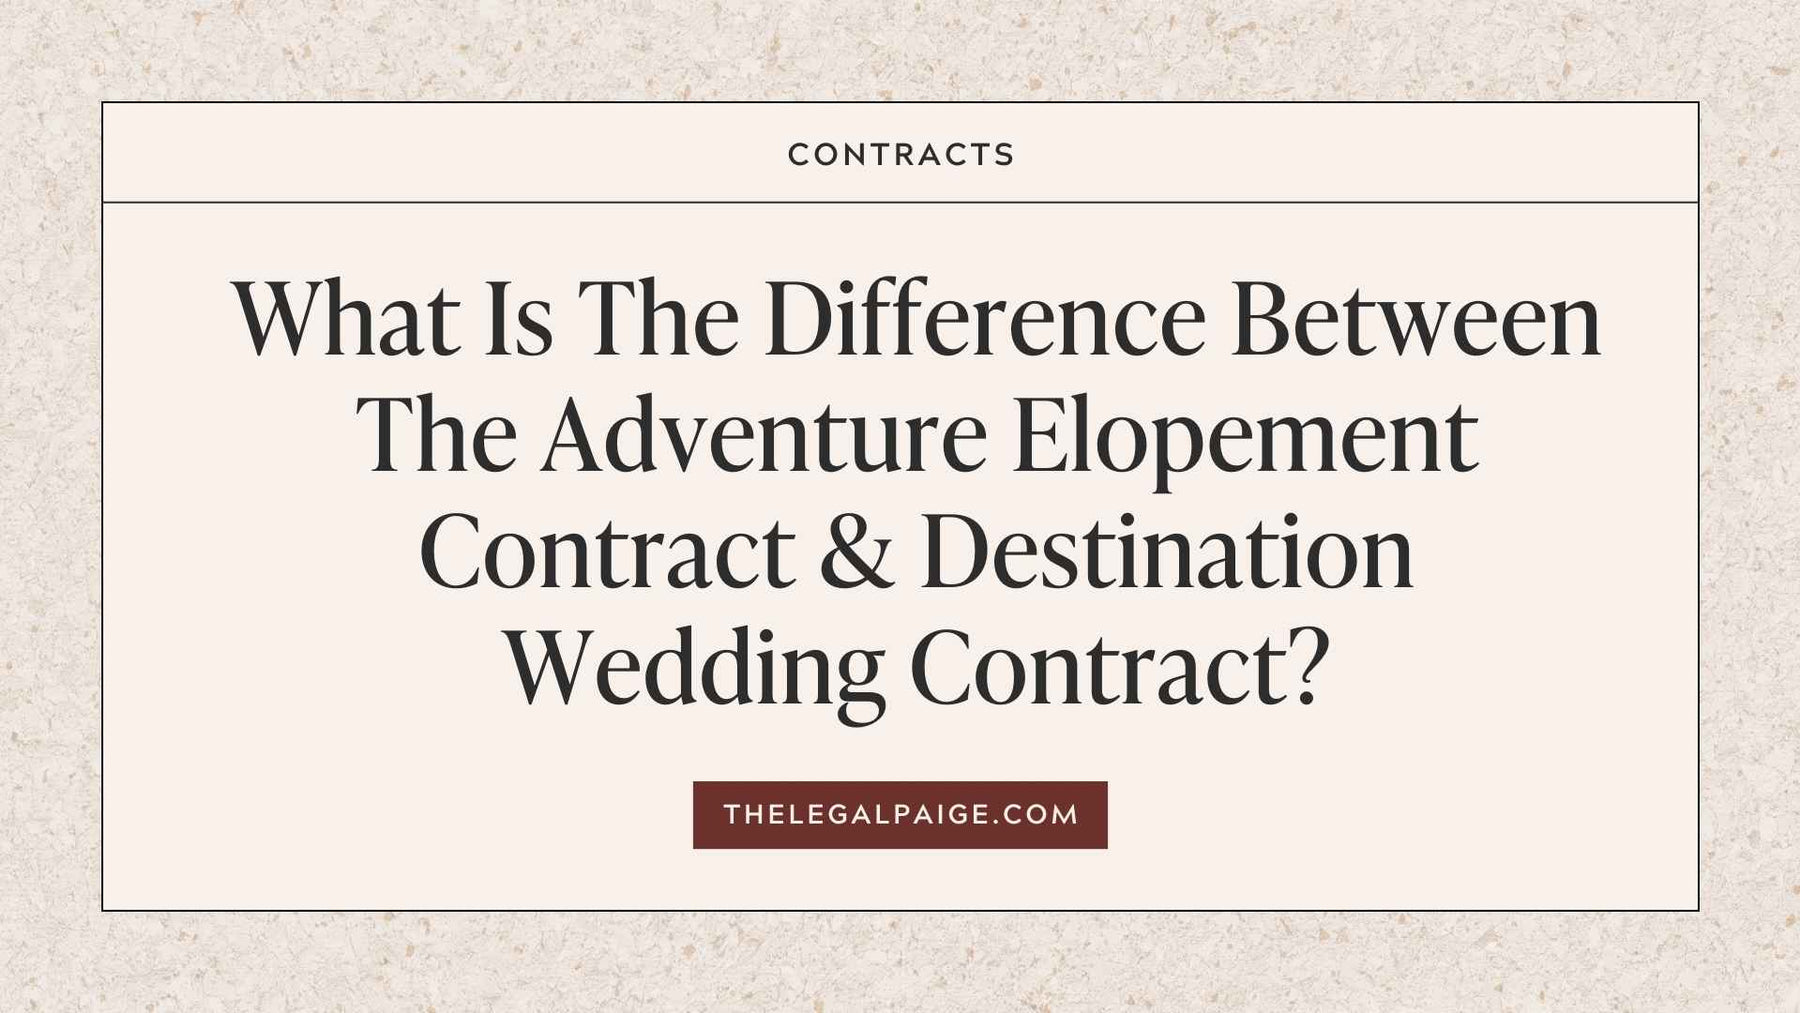 The Legal Paige Blog - What Is The Difference Between The Adventure Elopement Contract & Destination Wedding Contract?